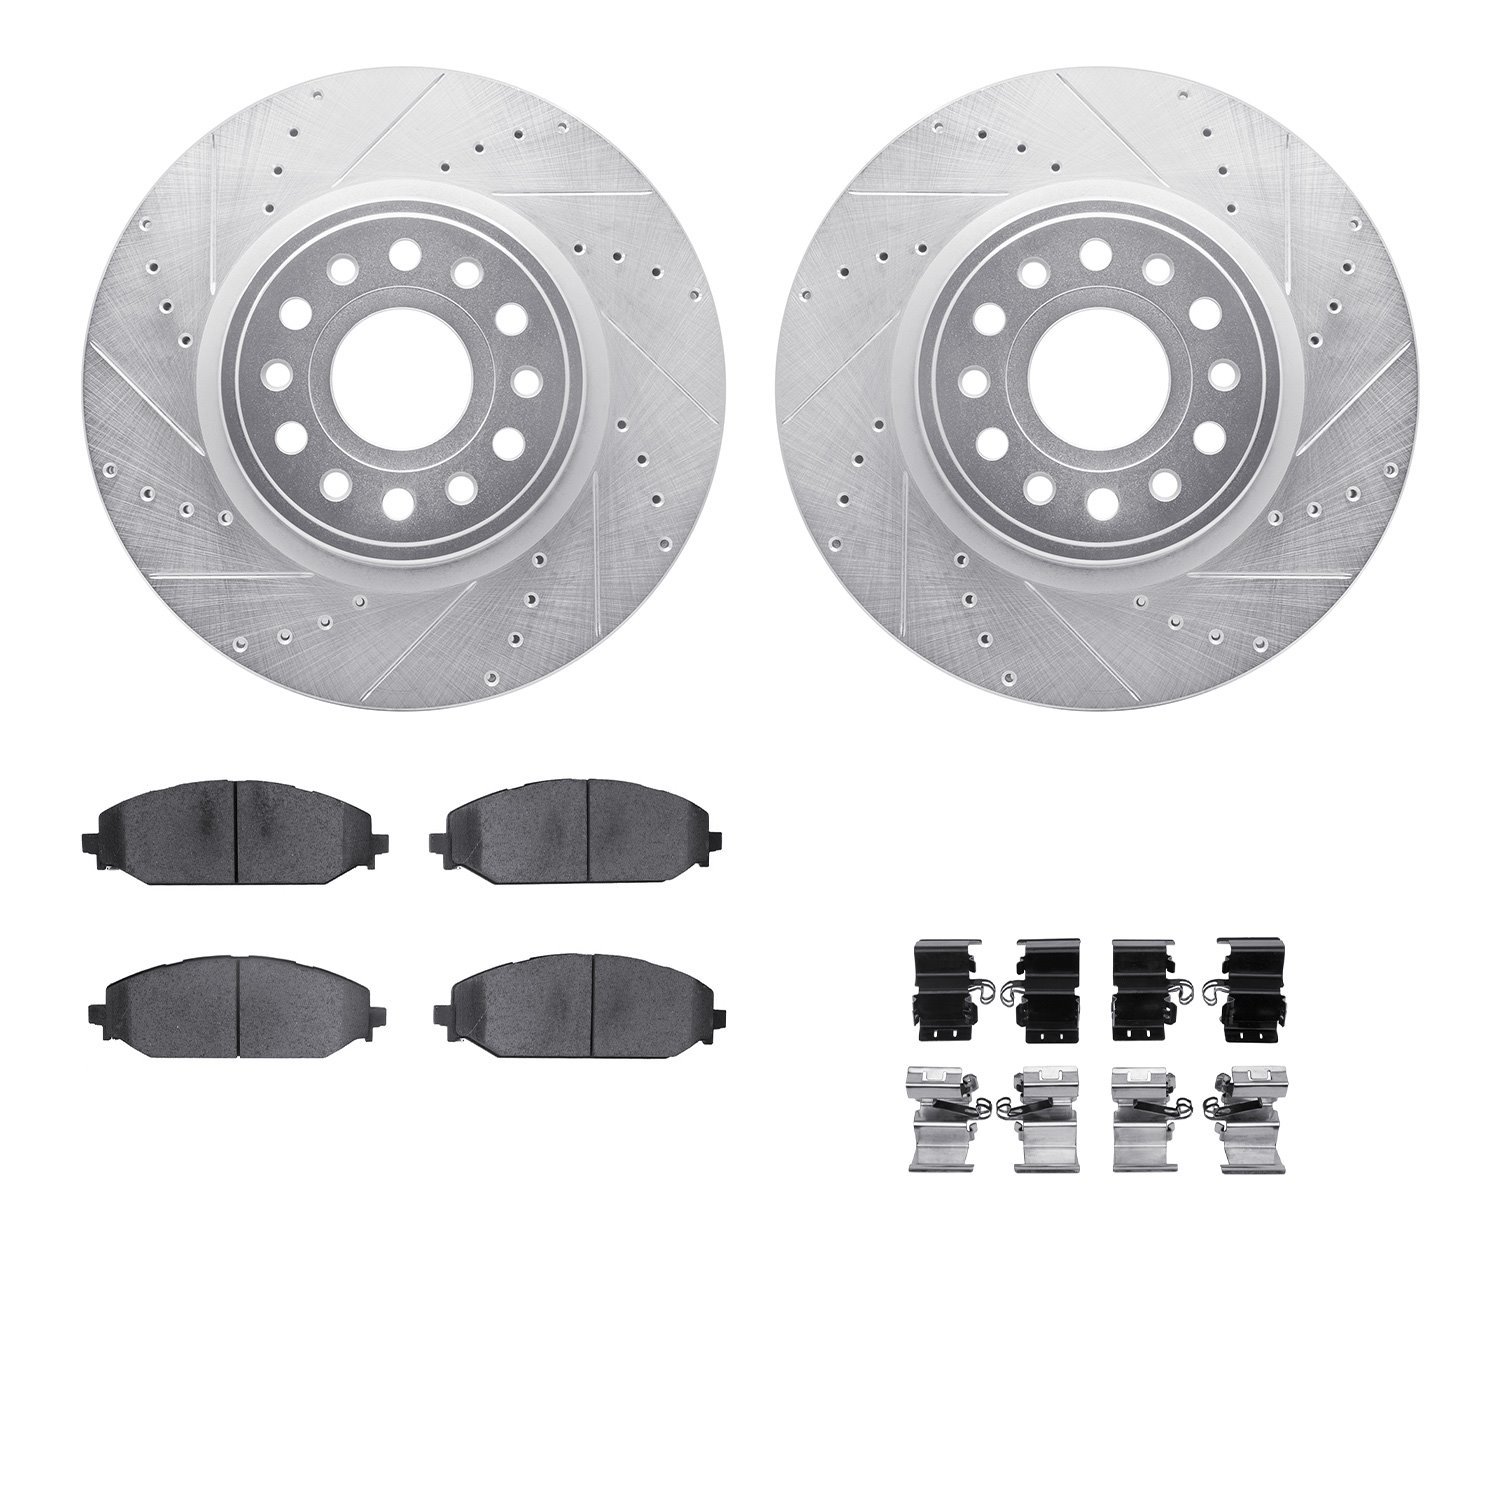 7412-40025 Drilled/Slotted Brake Rotors with Ultimate-Duty Brake Pads Kit & Hardware [Silver], Fits Select Mopar, Position: Fron